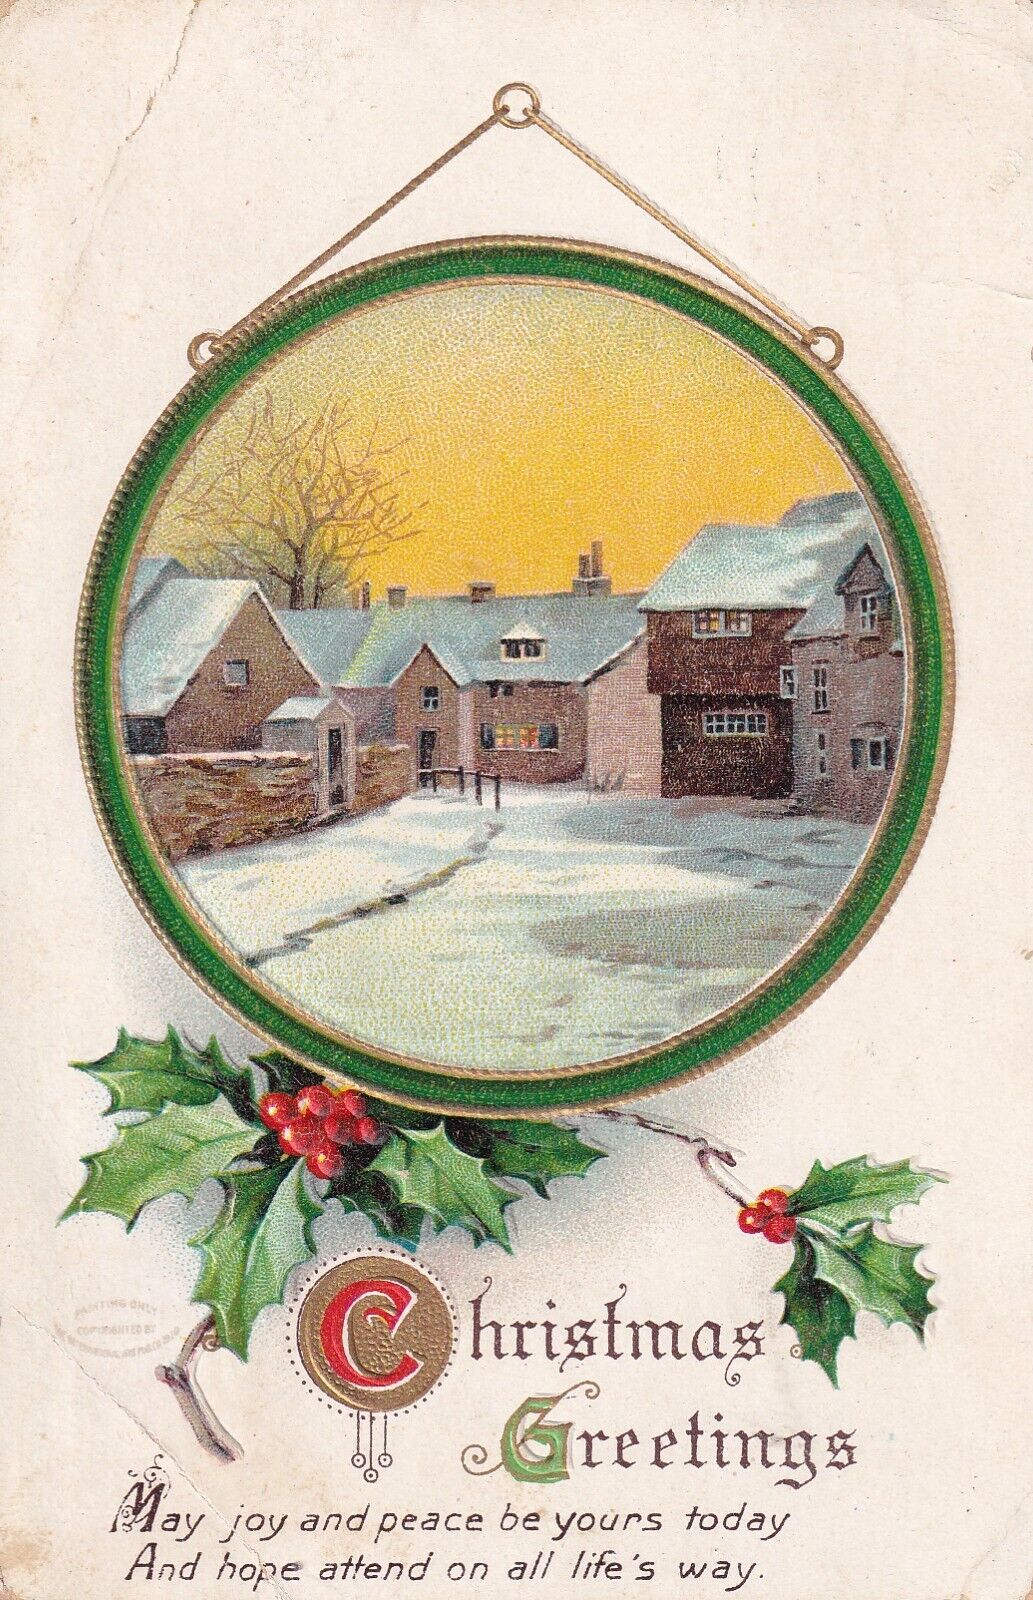 Vintage Christmas Greetings Joy and Peace 1910 Postcard Country Town Snow Scene